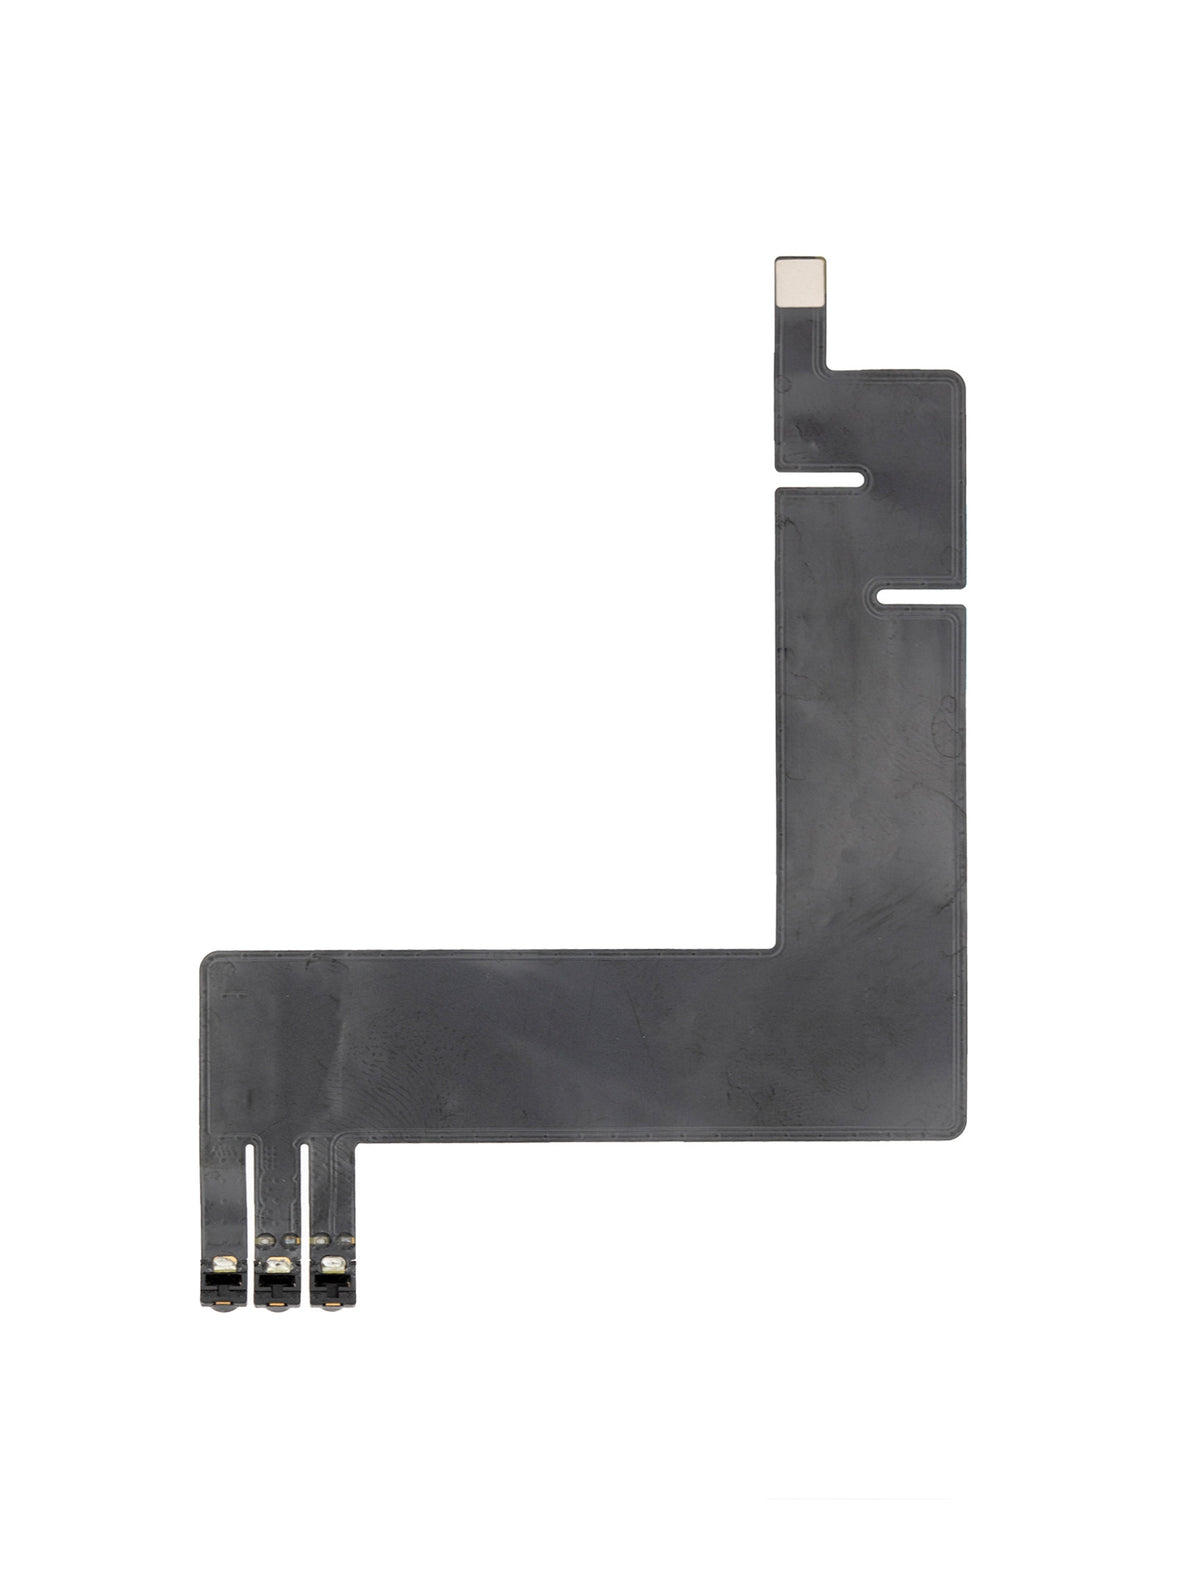 KEYBOARD FLEX CABLE (Black) COMPATIBLE WITH IPAD PRO 10.5" 1ST